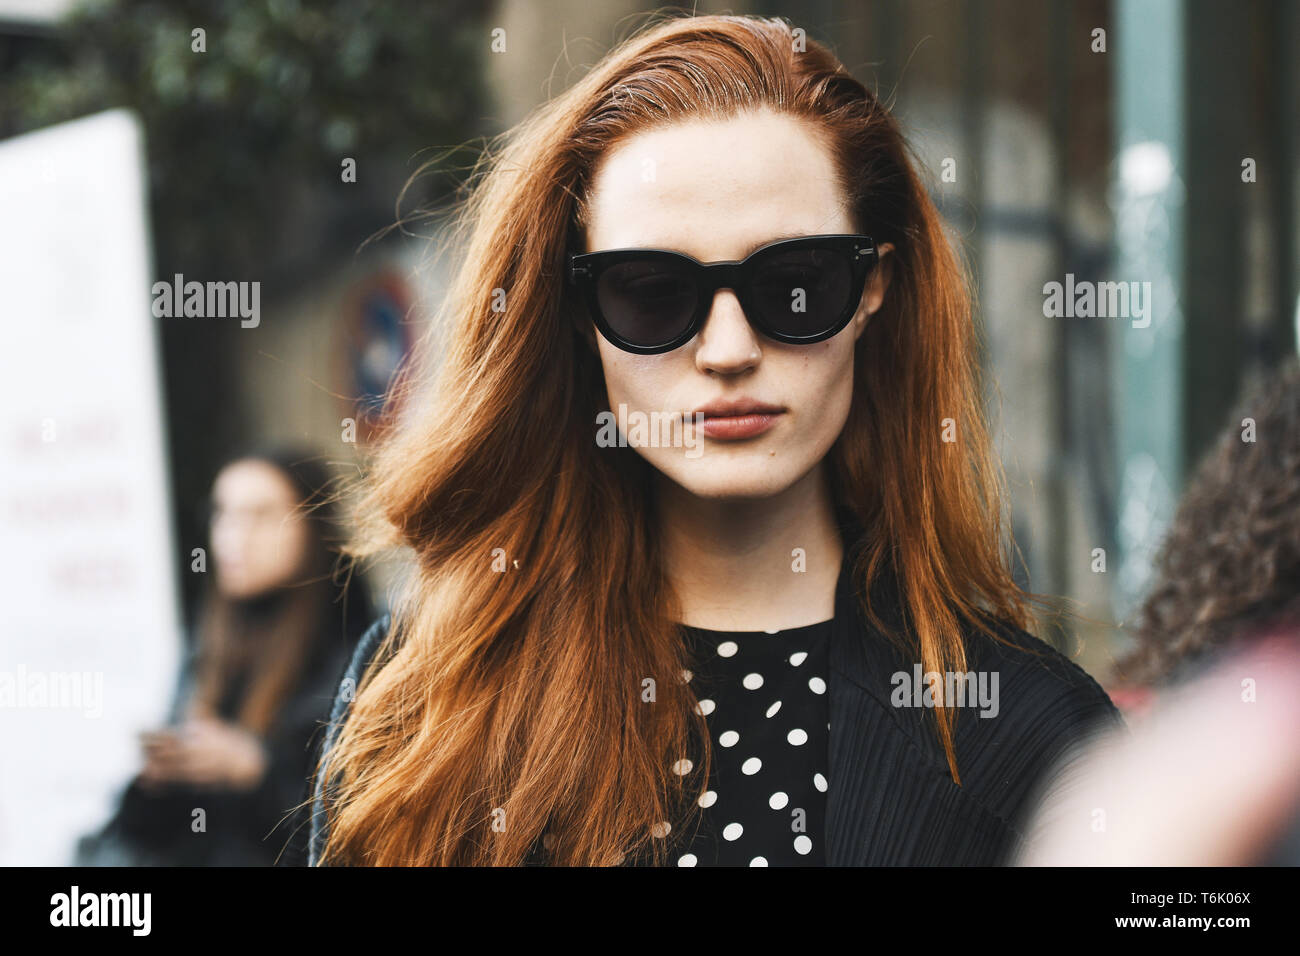 Milan, Italy - February 20, 2019: Street style outfit after a fashion show during Milan Fashion Week - MFWFW19 Stock Photo